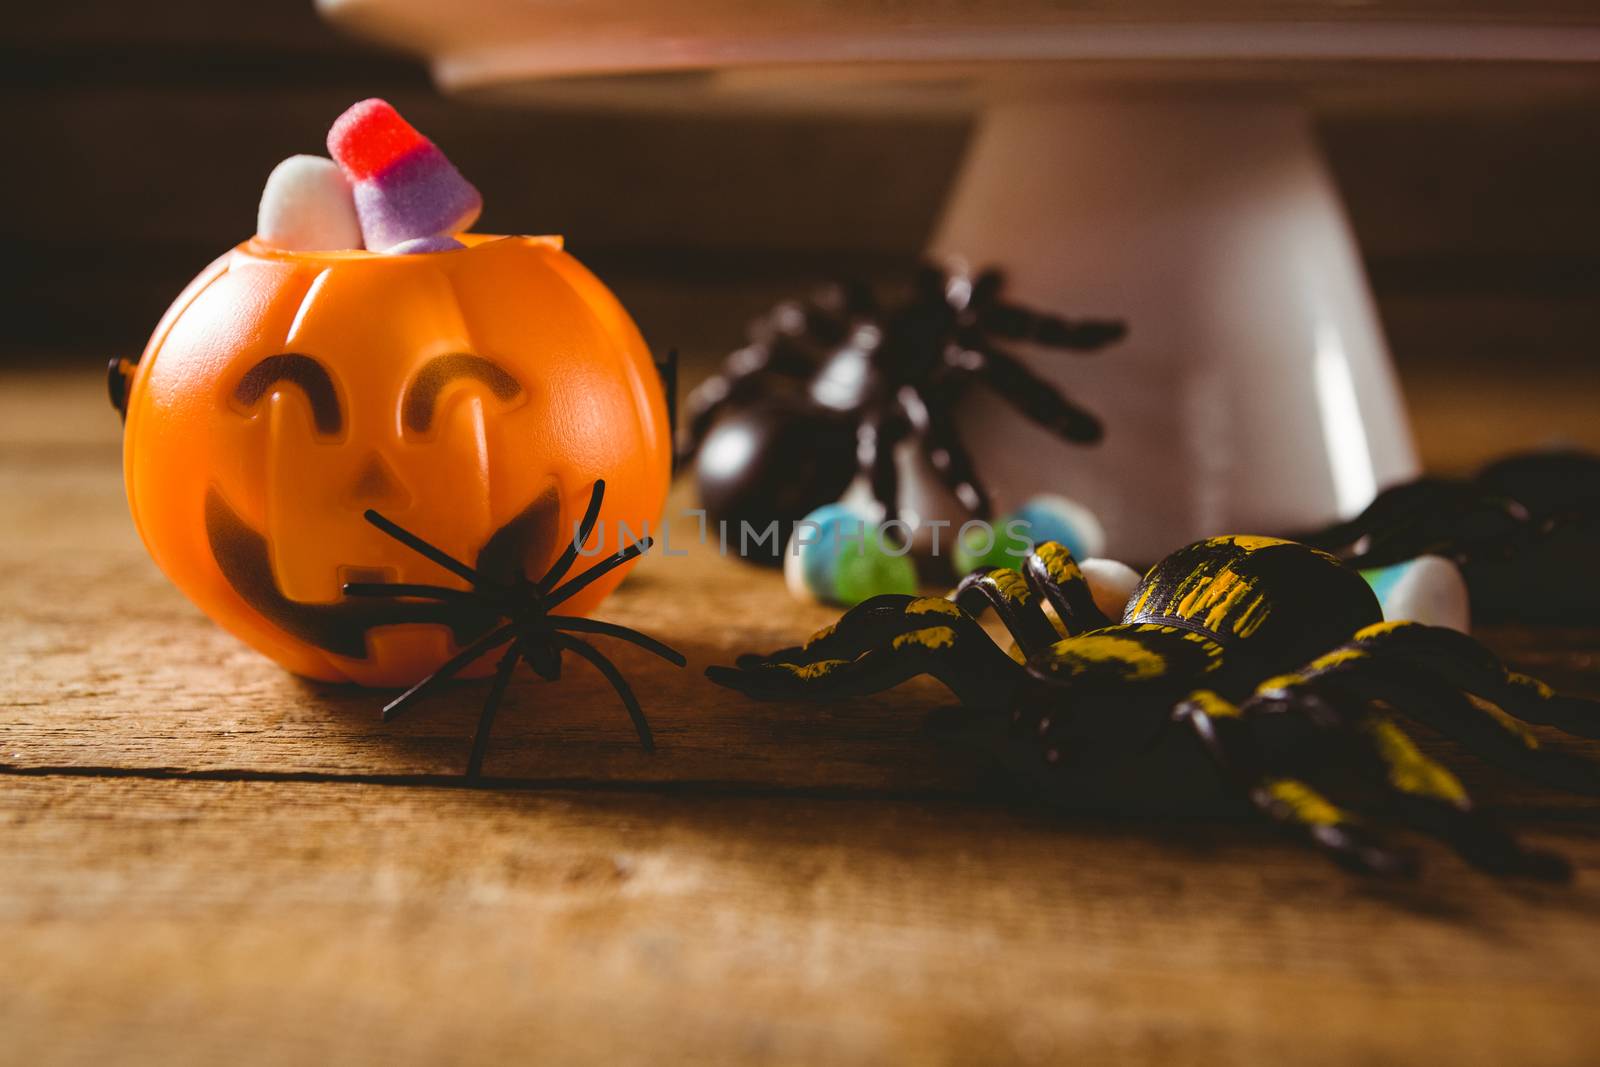 Decorations with candies on wooden table during Halloween by Wavebreakmedia